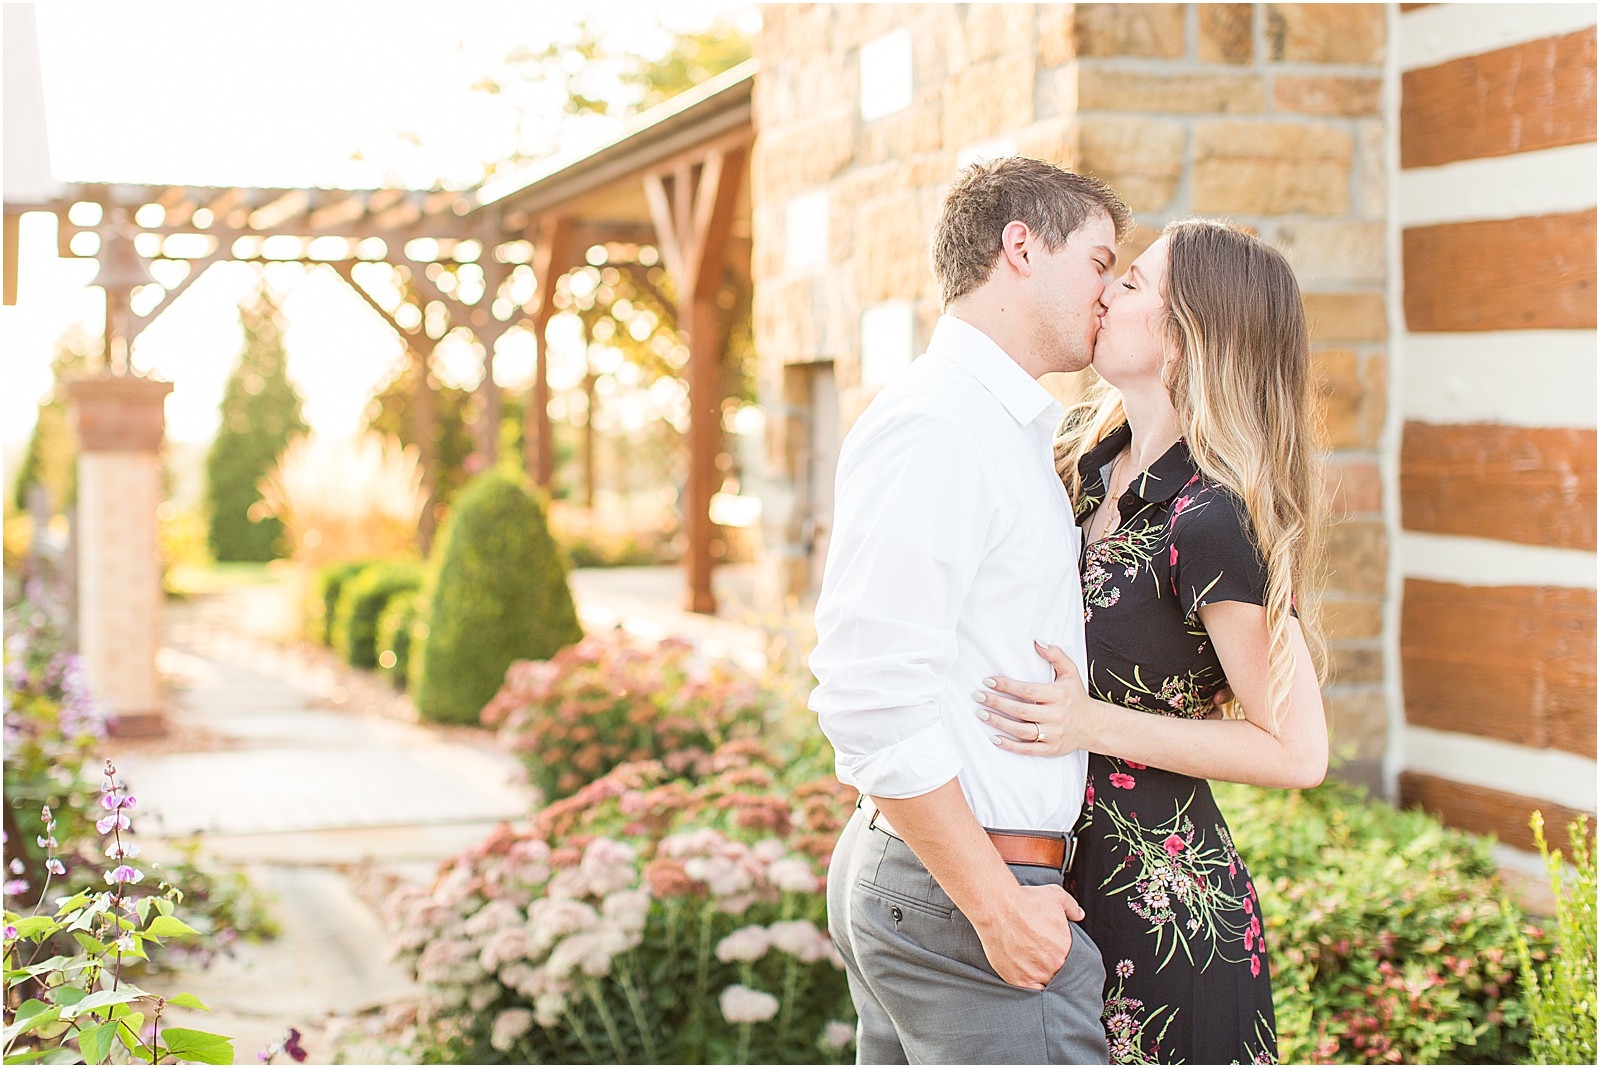 A Jasper Indiana Engagement Session | Tori and Kyle | Bret and Brandie Photography026.jpg